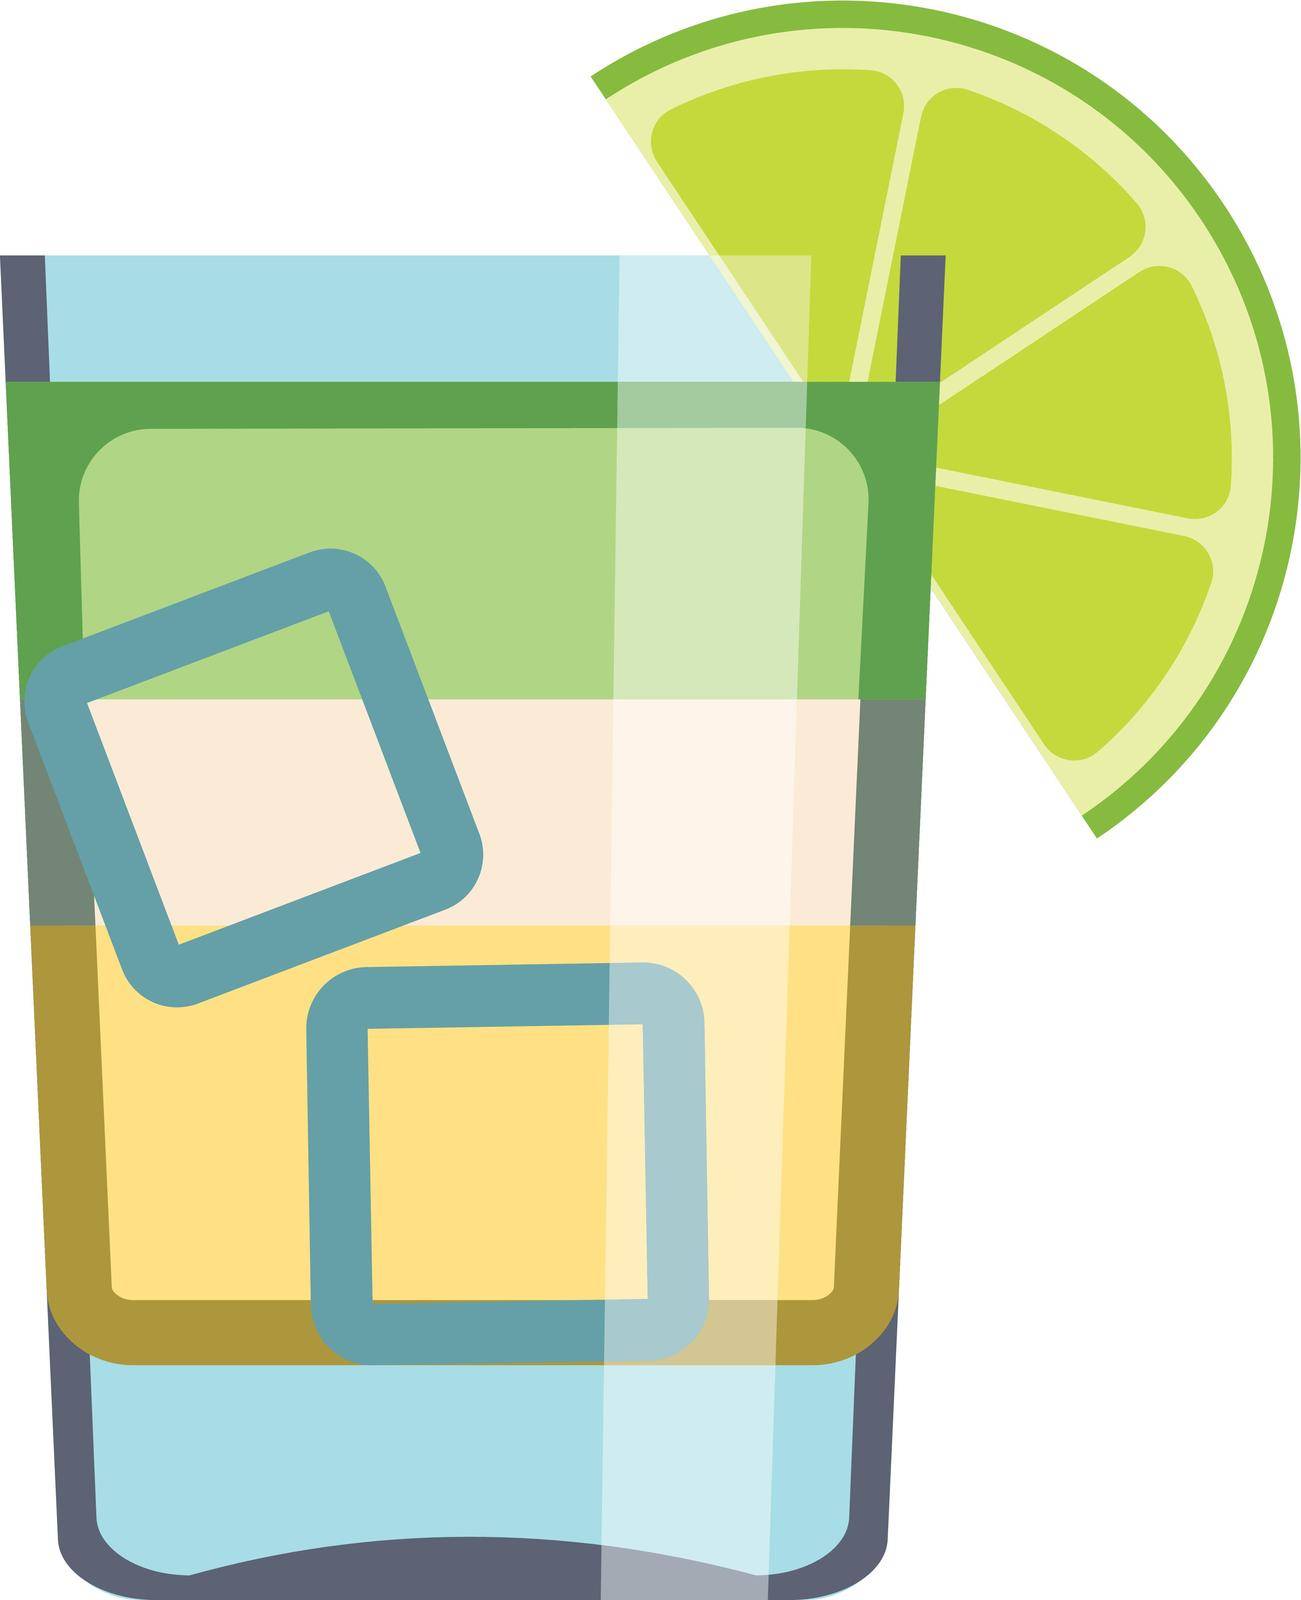 Summer cocktail icon. Fresh citrus slice on cold drink glass isolated on white background